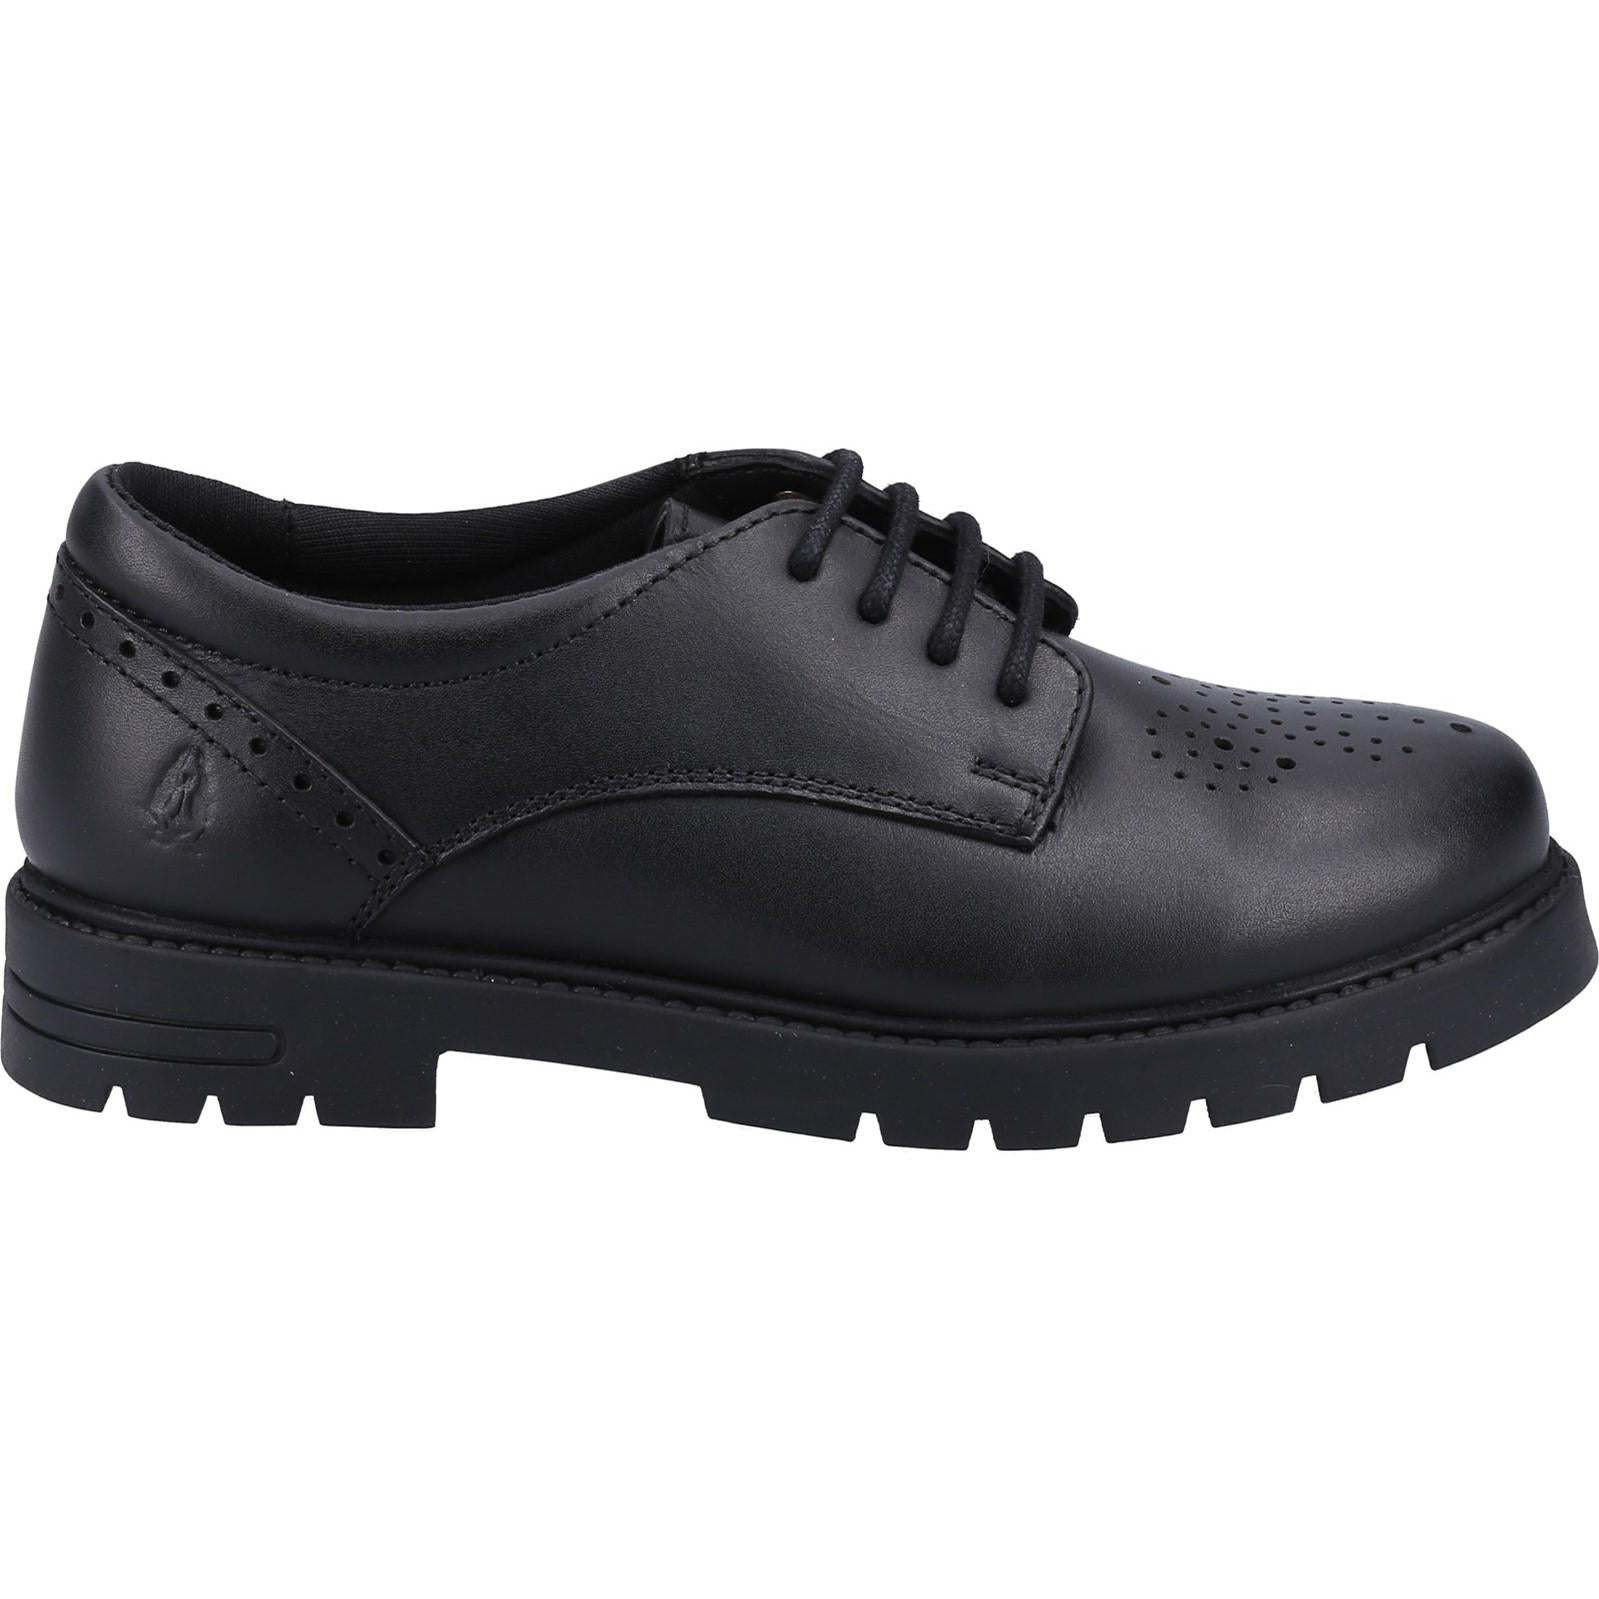 Hush Puppies Jayne Lace Up SNR Shoe